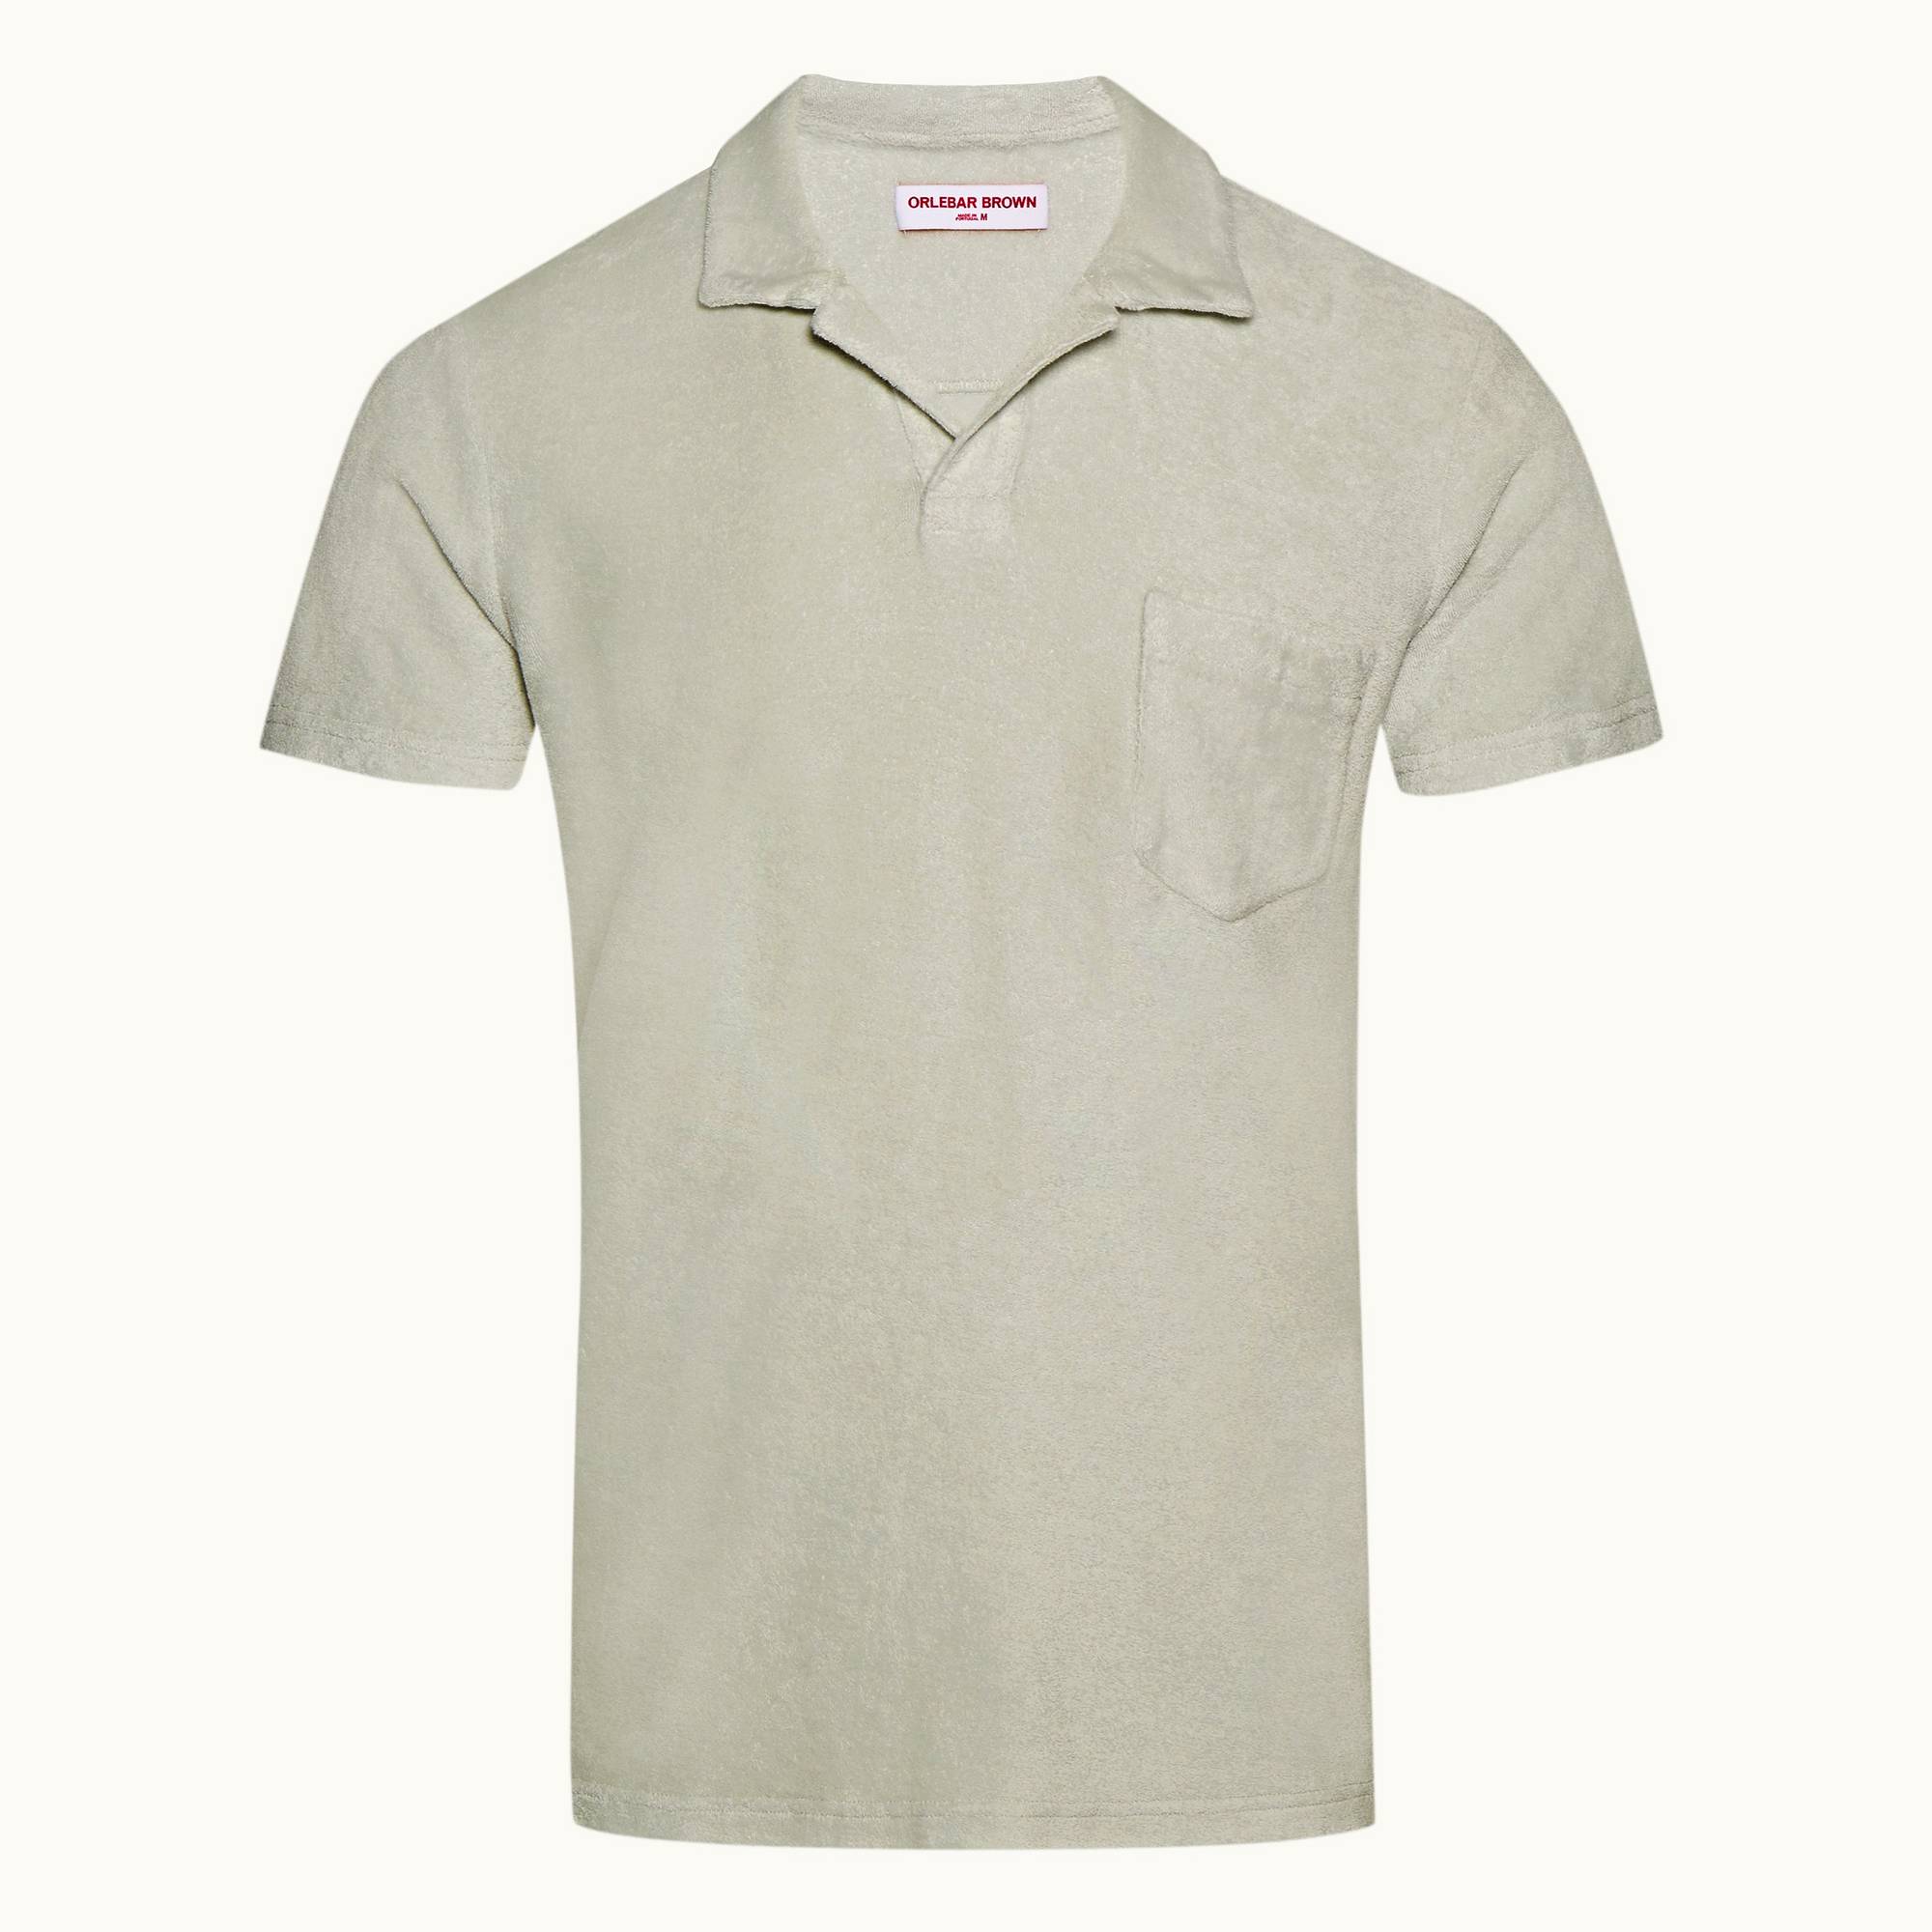 Terry Towelling - Mens Strata Tailored Fit Towelling Resort Polo Shirt